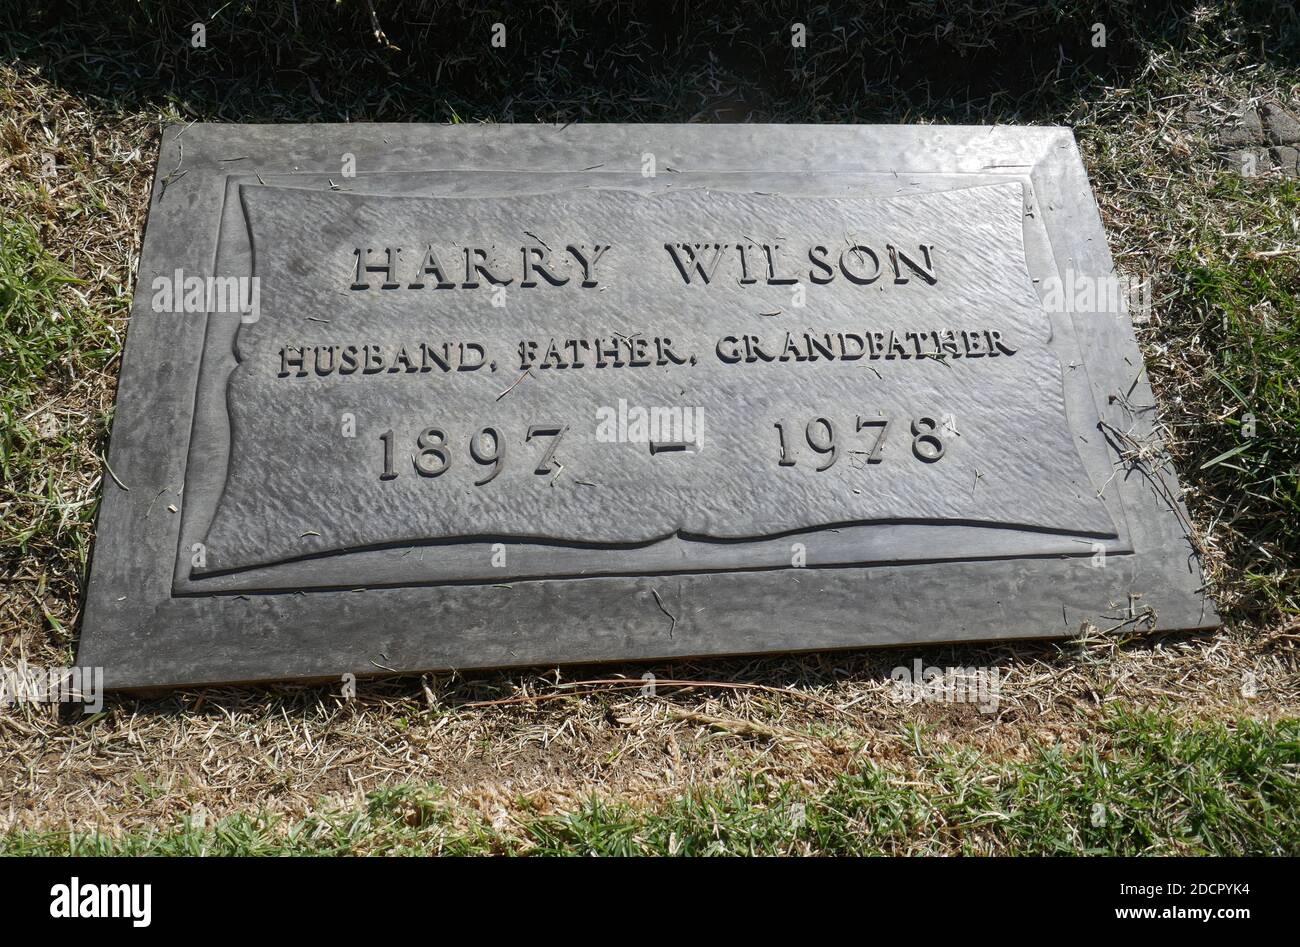 Los Angeles, California, USA 17th November 2020 A general view of atmosphere of actor Harry Wilson's Grave at Mount Sinai Cemetery Hollywood Hills on November 17, 2020 in Los Angeles, California, USA. Photo by Barry King/Alamy Stock Photo Stock Photo